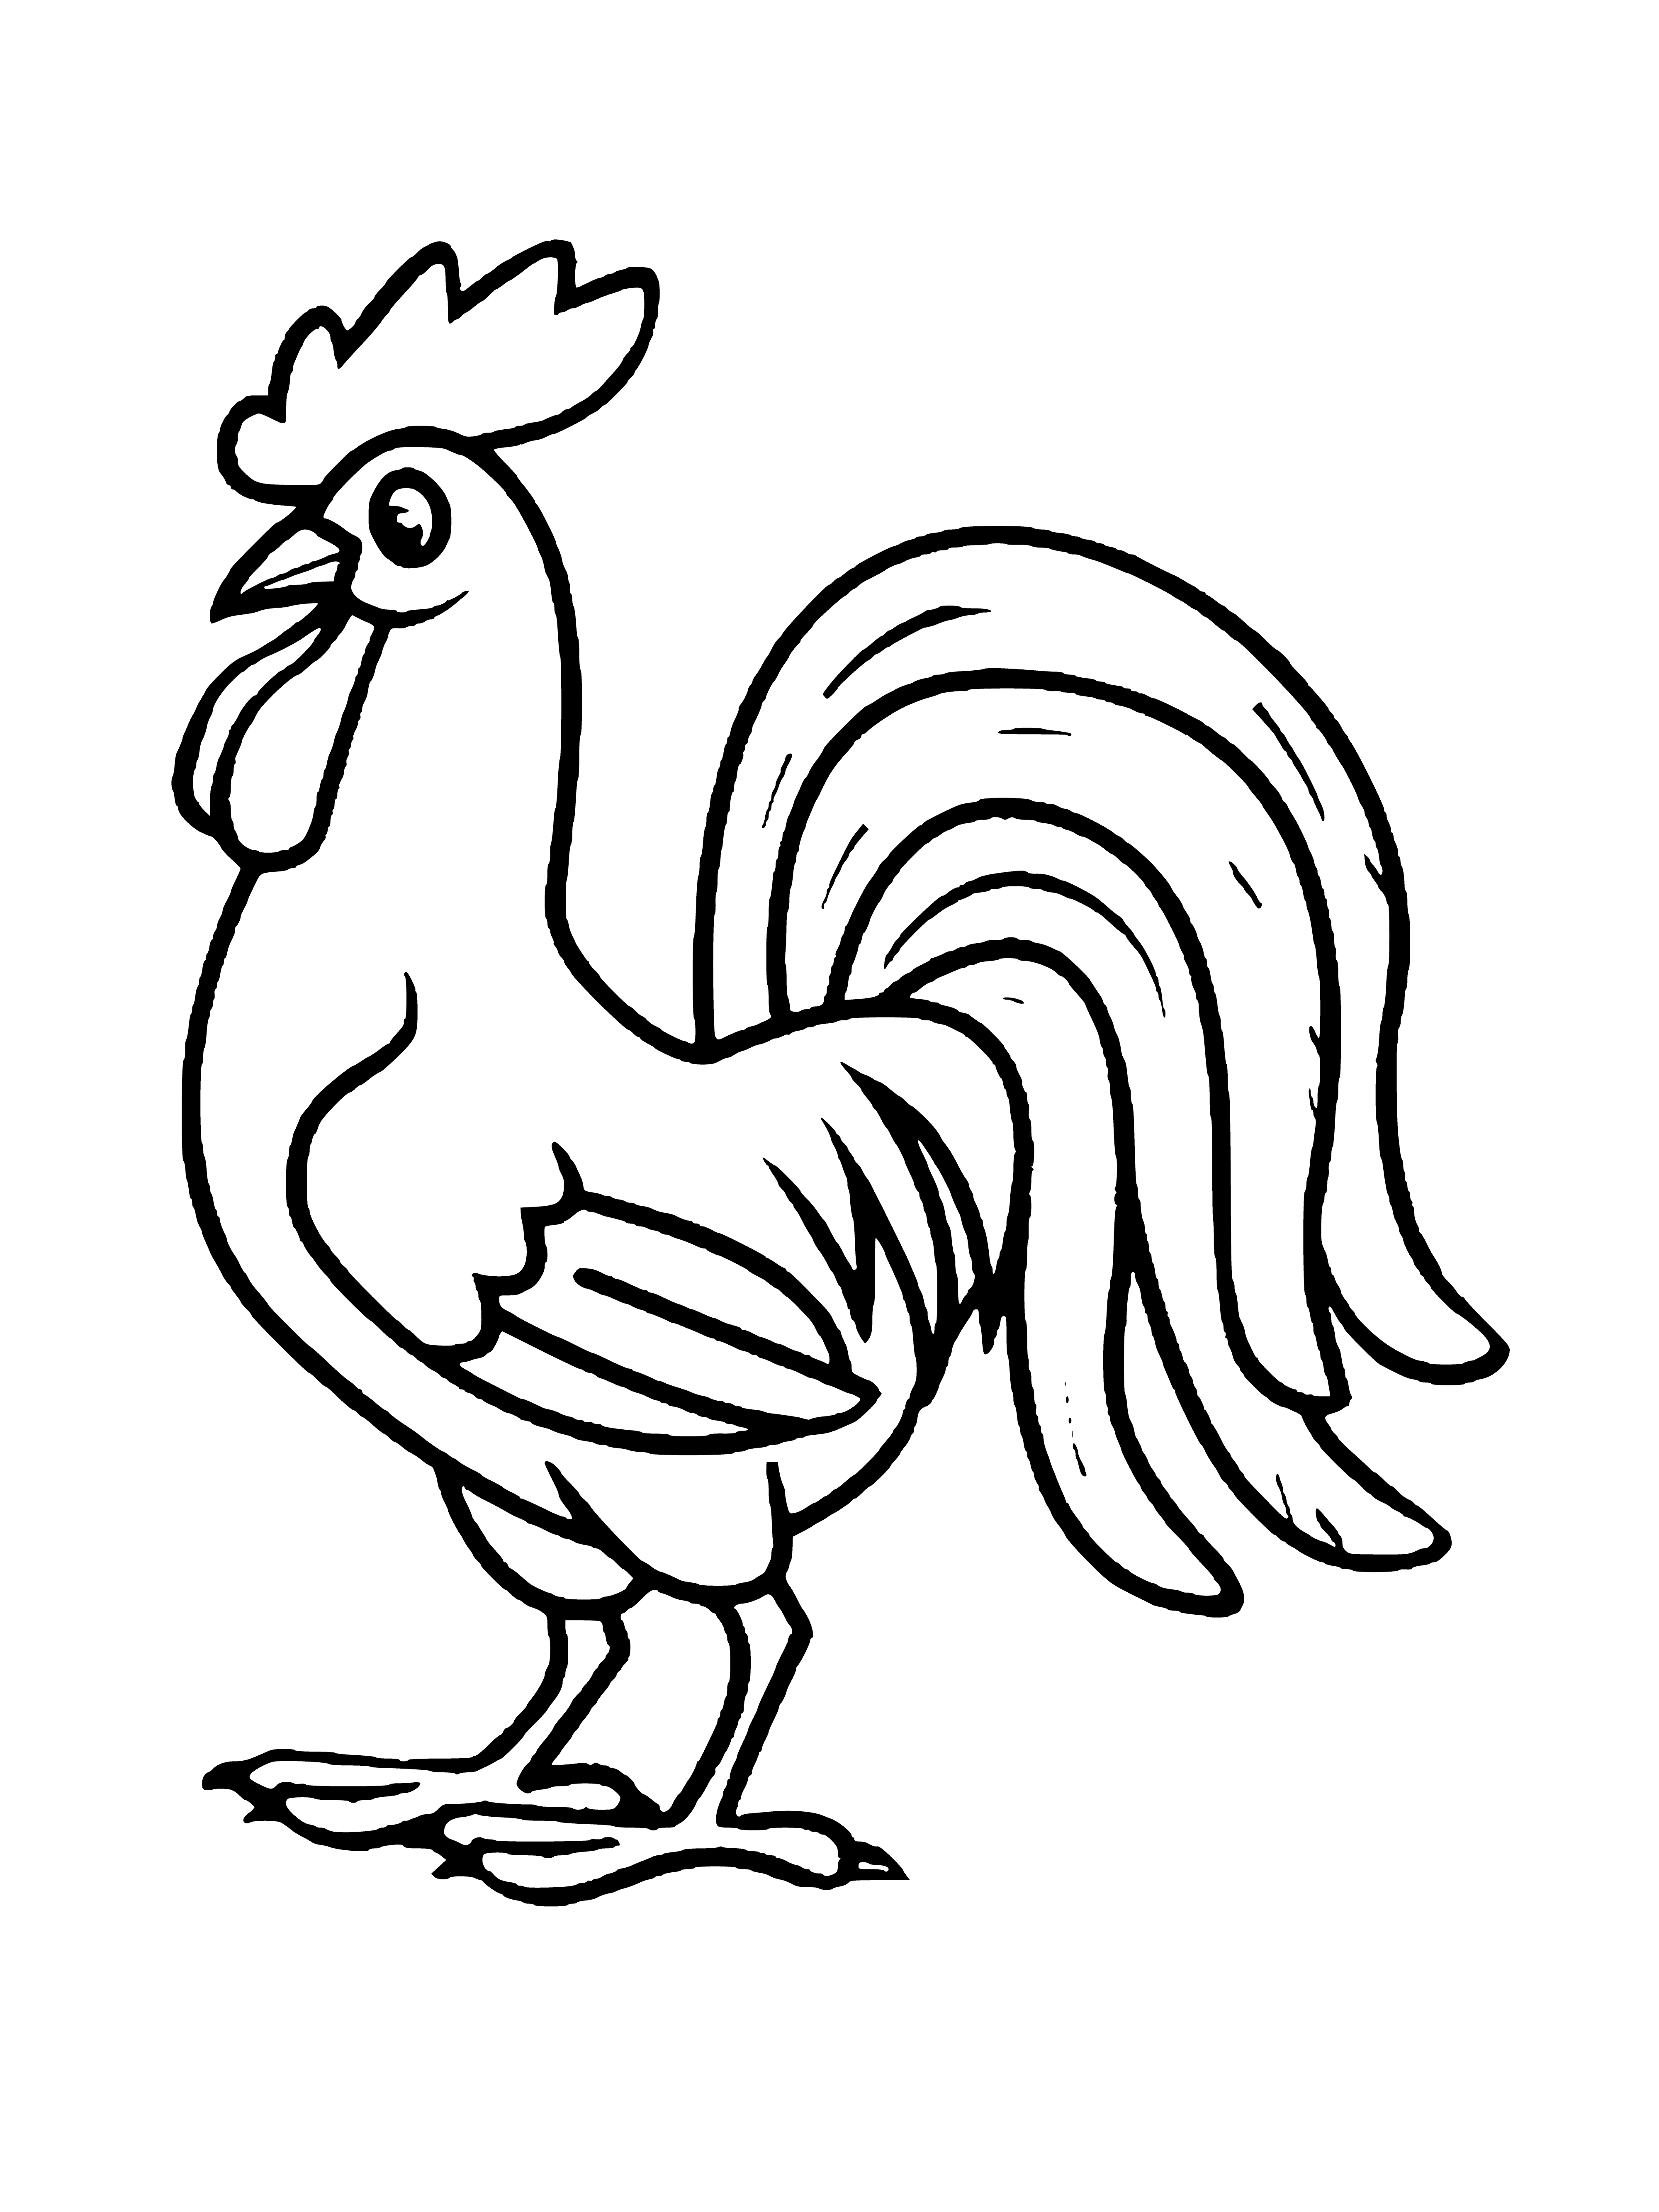 coloring page: The rooster has a crown of feathers & a long tail. Usually red, it crows to announce the dawn.